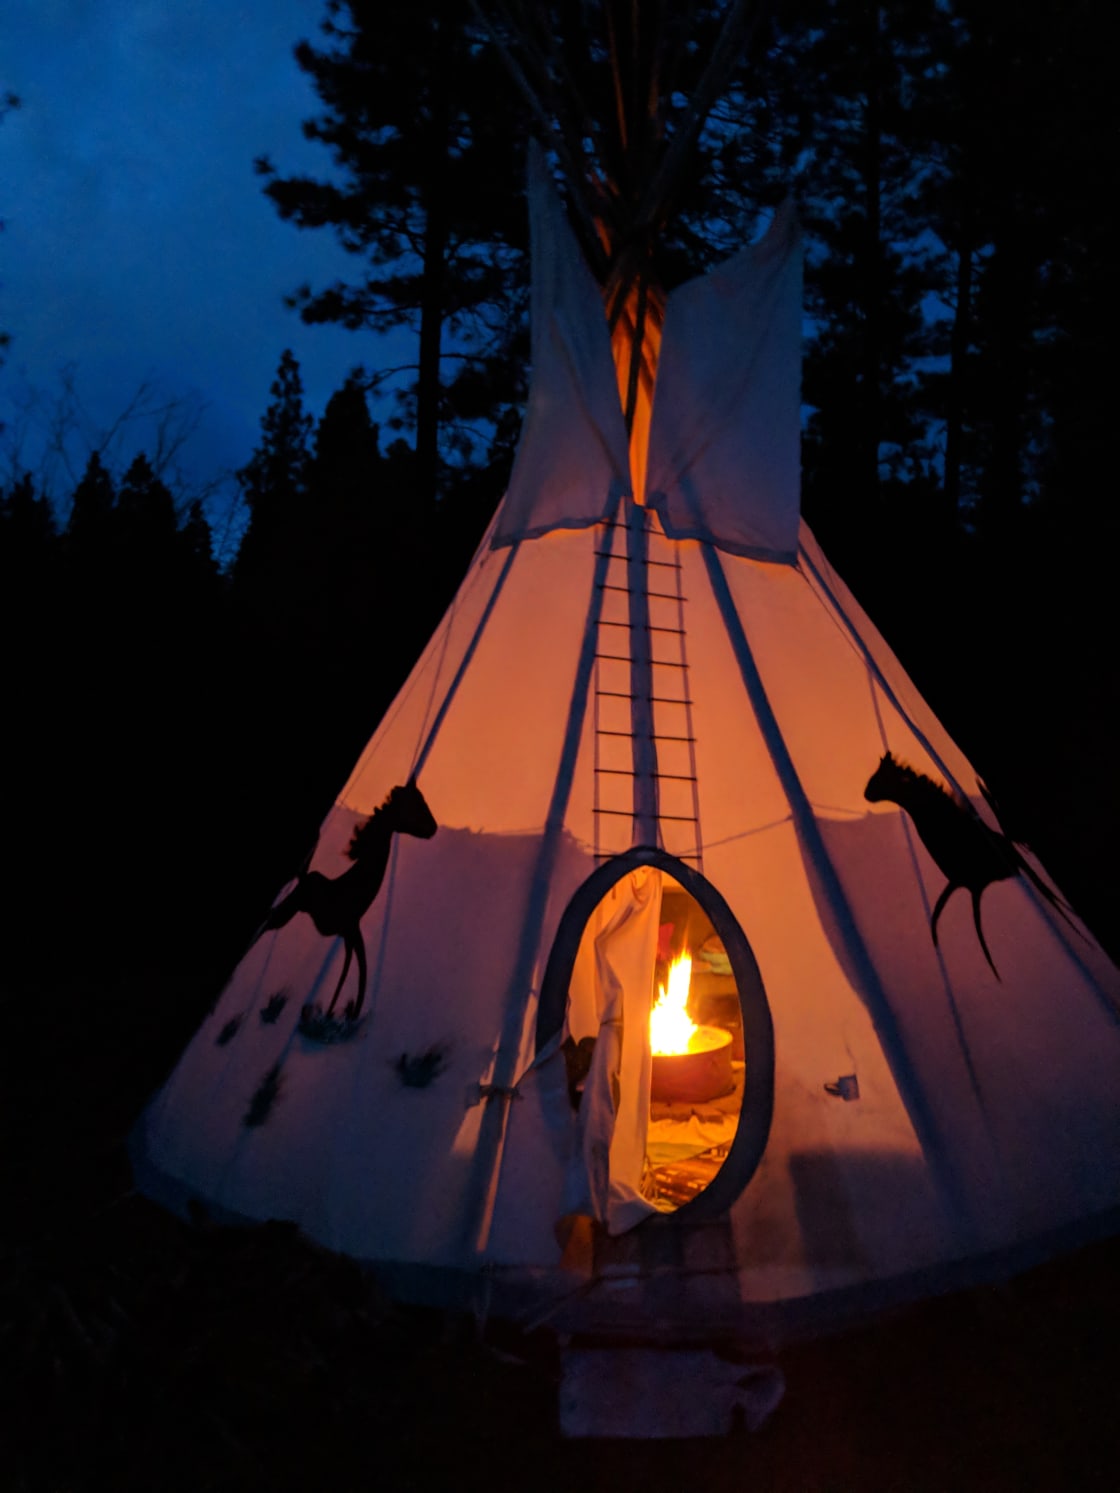 Night time picture of tipi